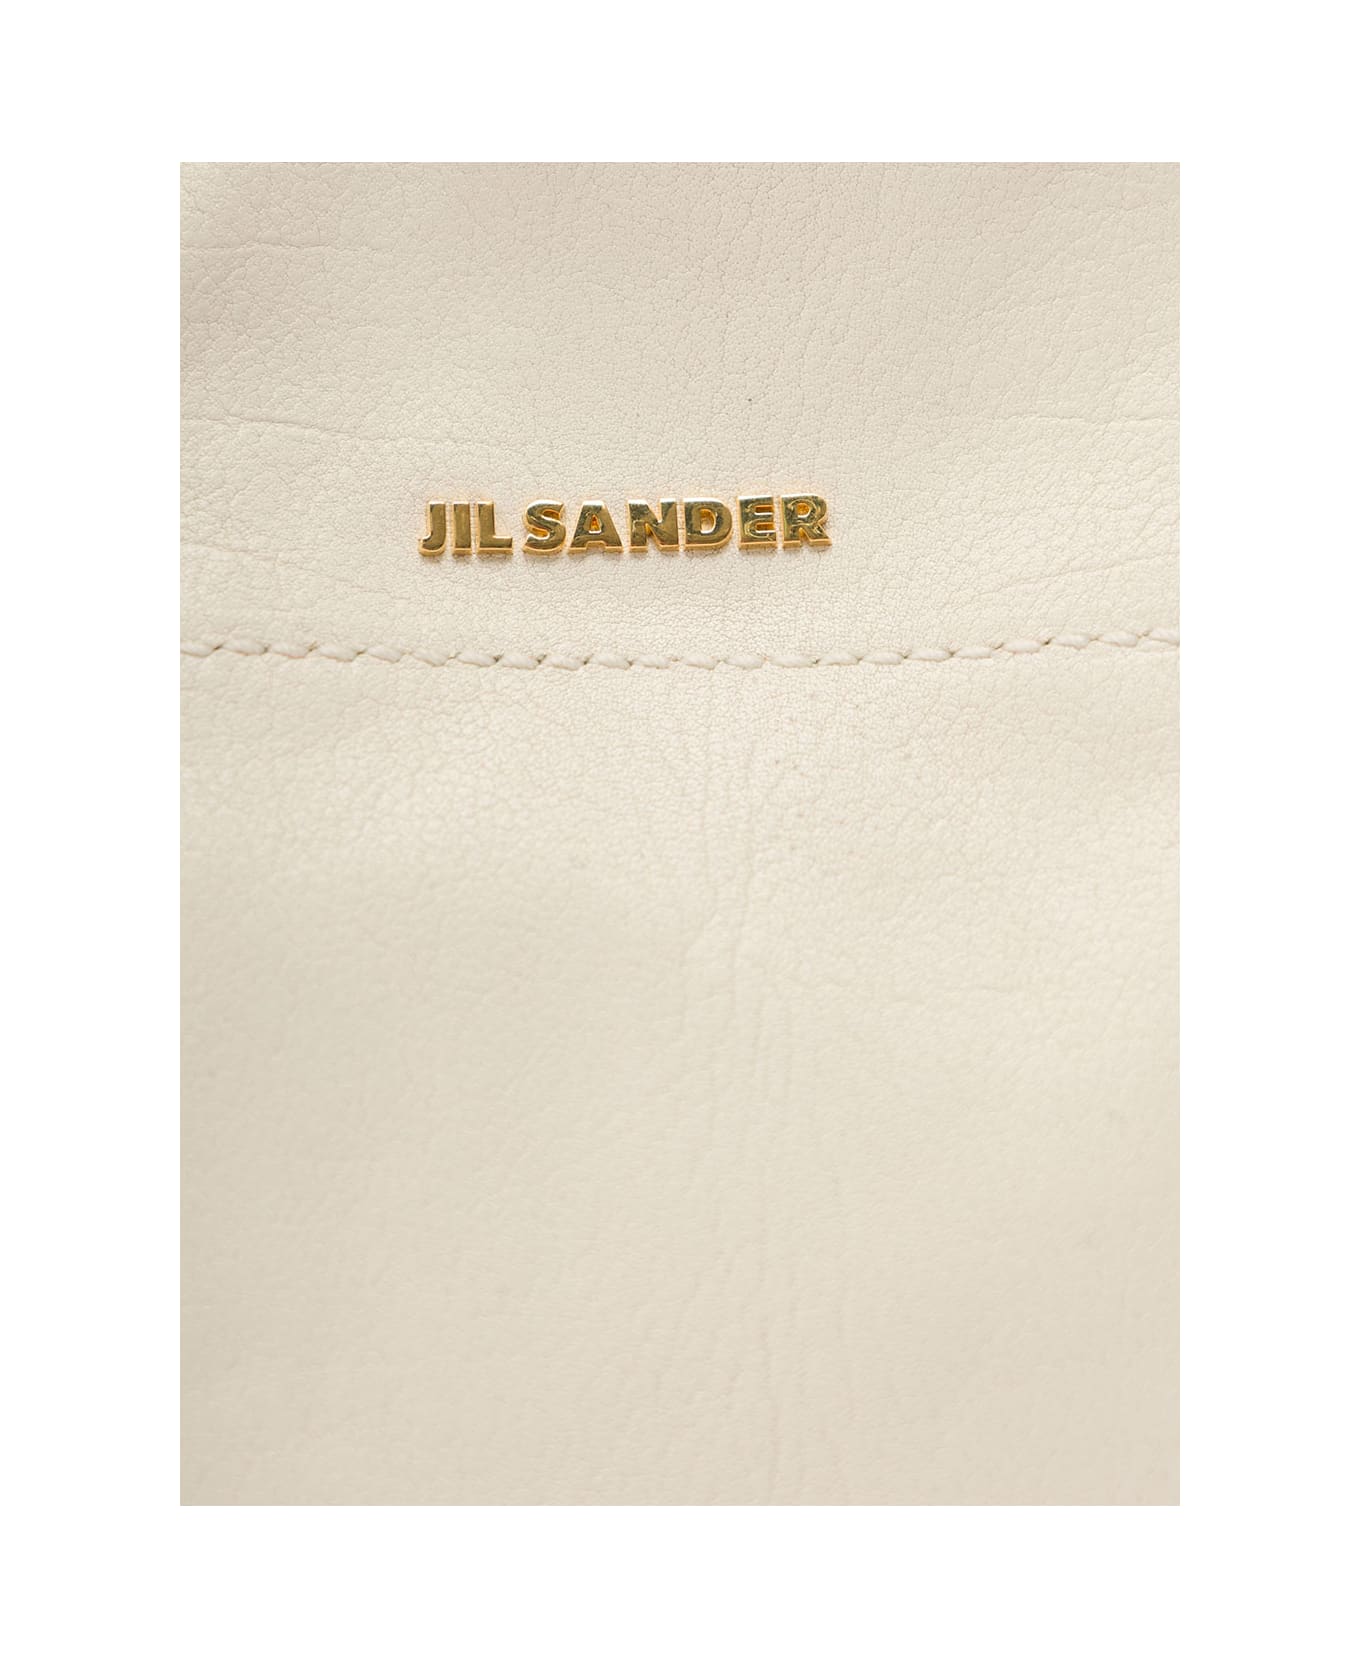 Jil Sander White Tote Bag With Bamboo Style Handles In Leather Woman - White